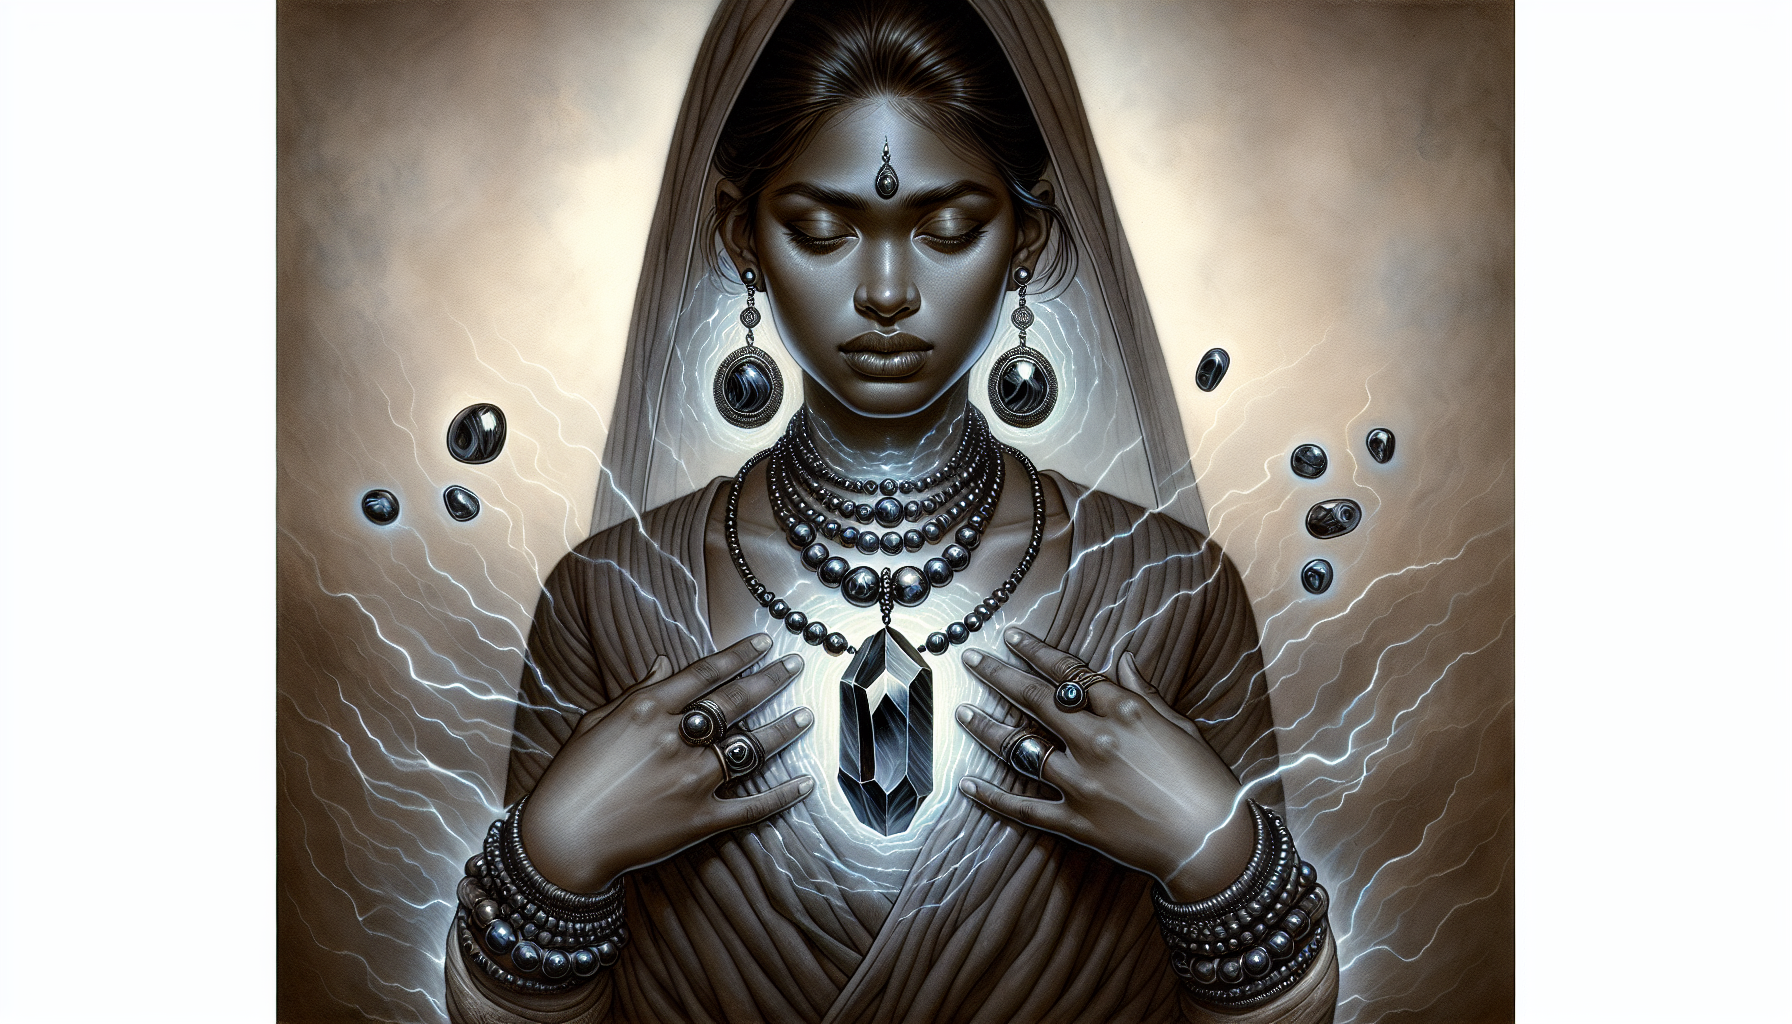 Illustration of a person wearing hematite jewelry